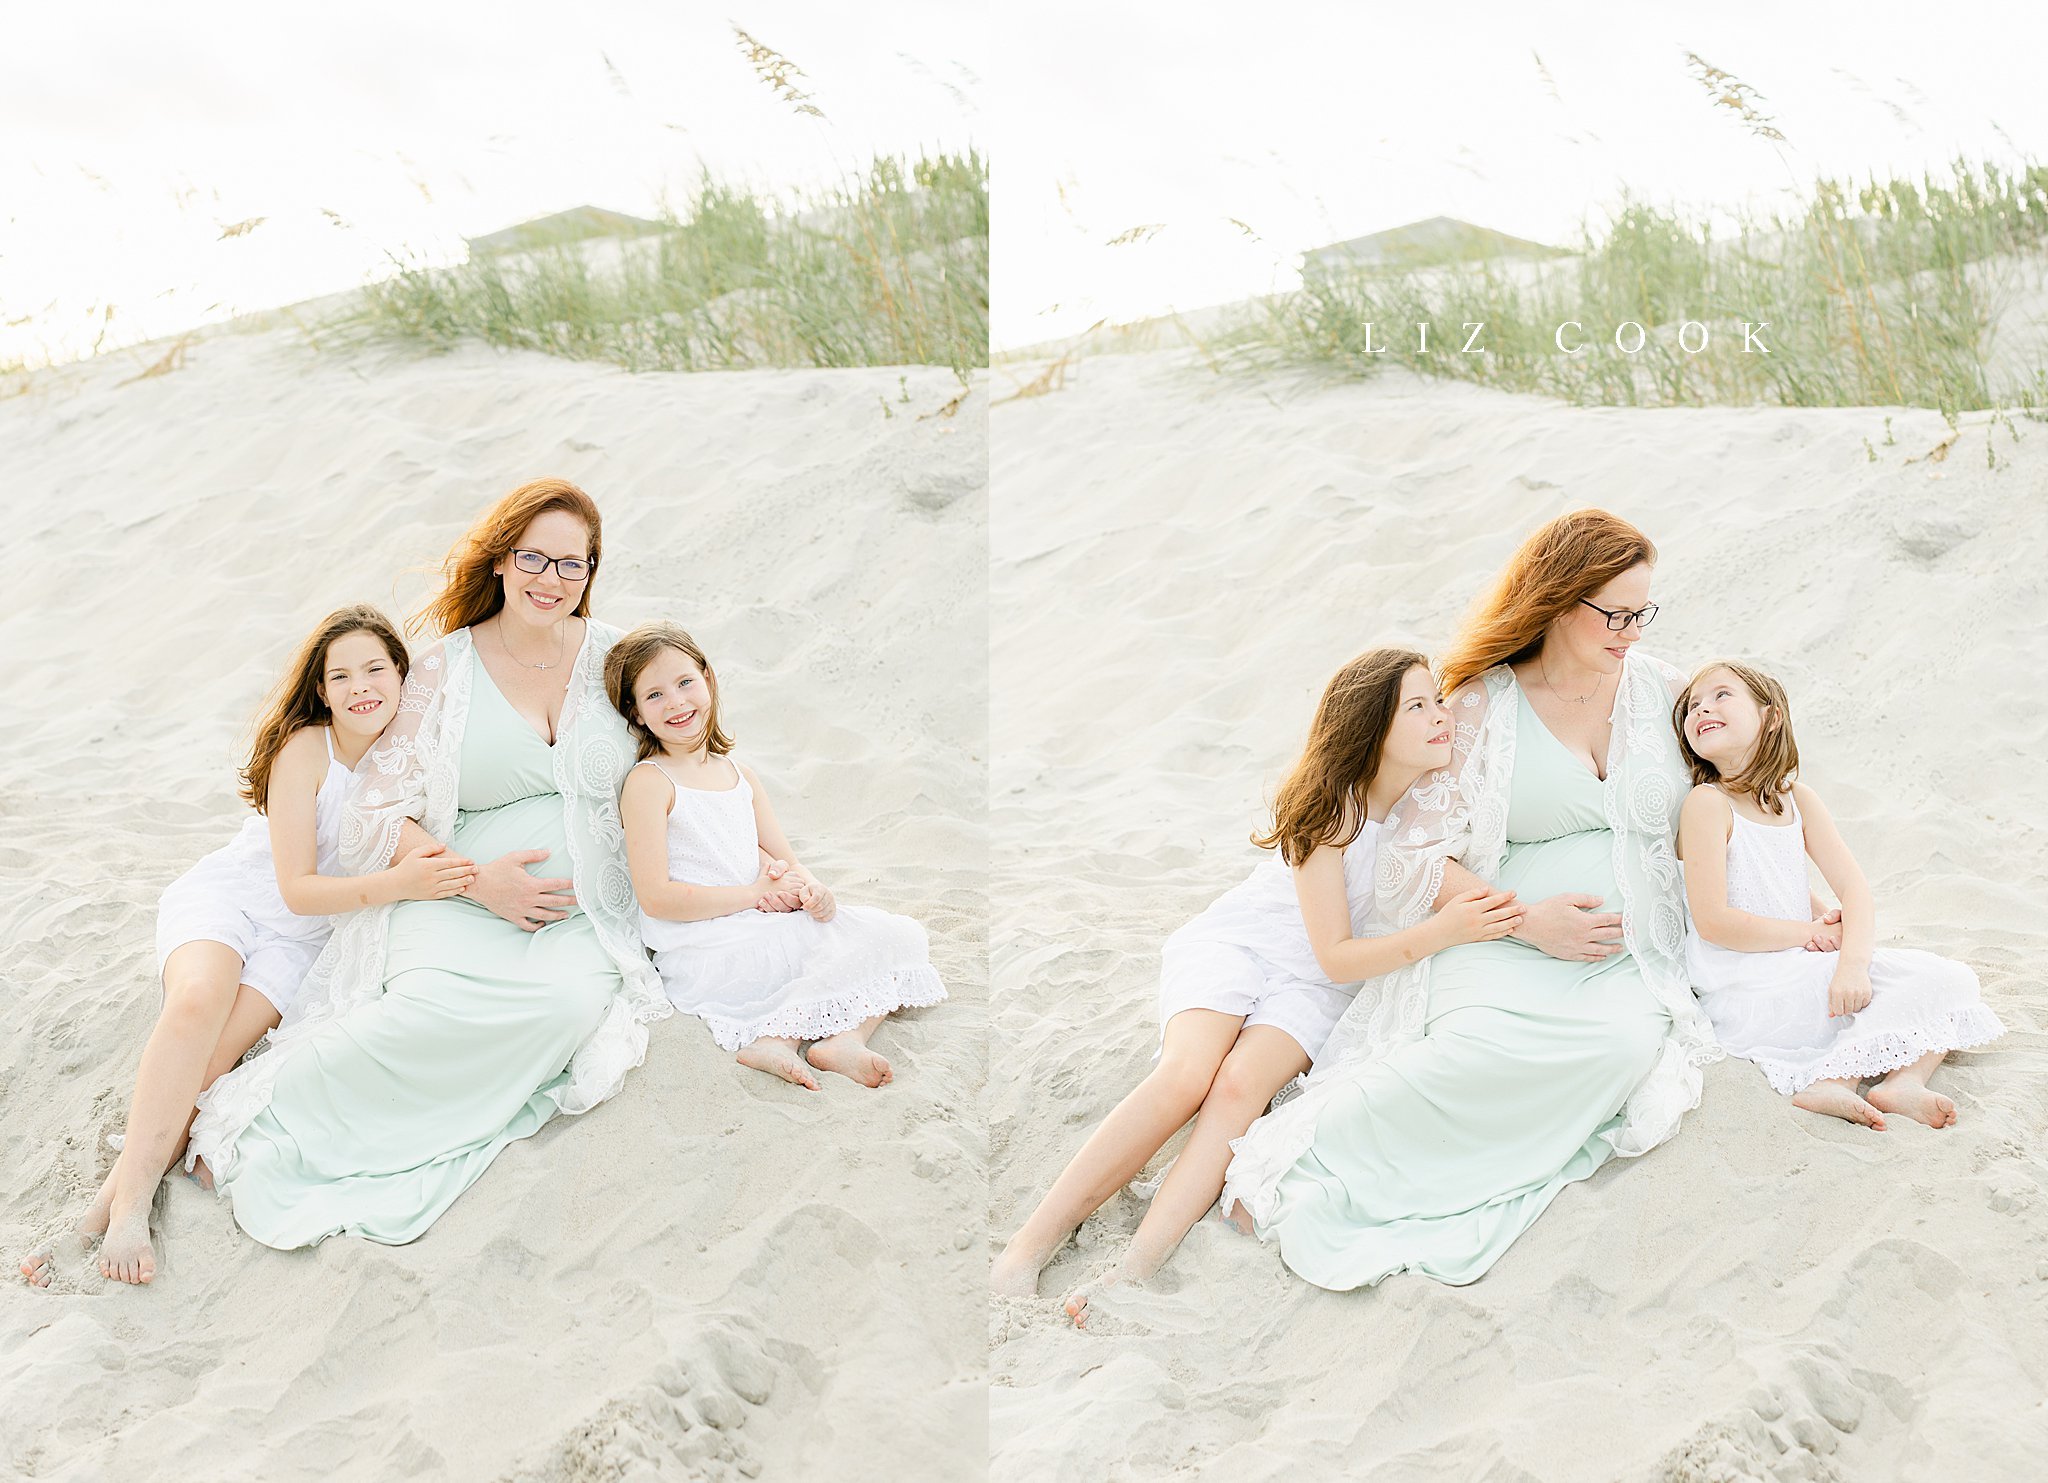 maternity-pictures-on-beach-liz-cook-photography-caroline-jean-photography_0012.jpg